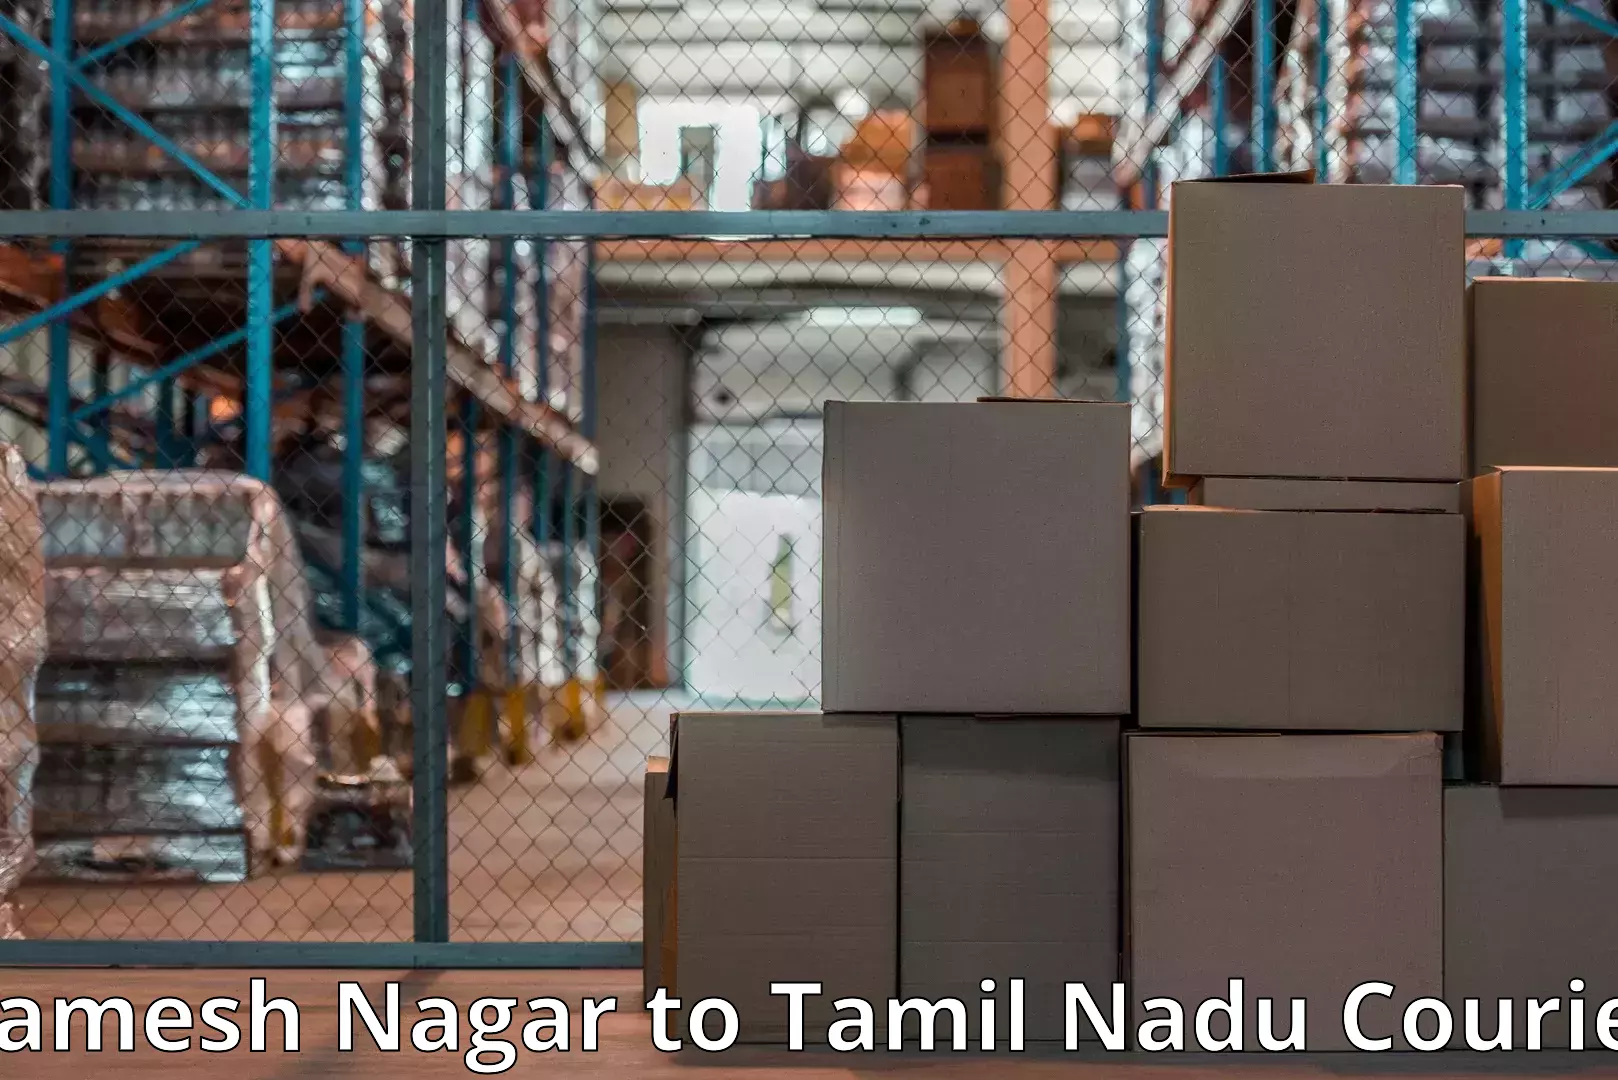 Quality moving services Ramesh Nagar to Meenakshi Academy of Higher Education and Research Chennai